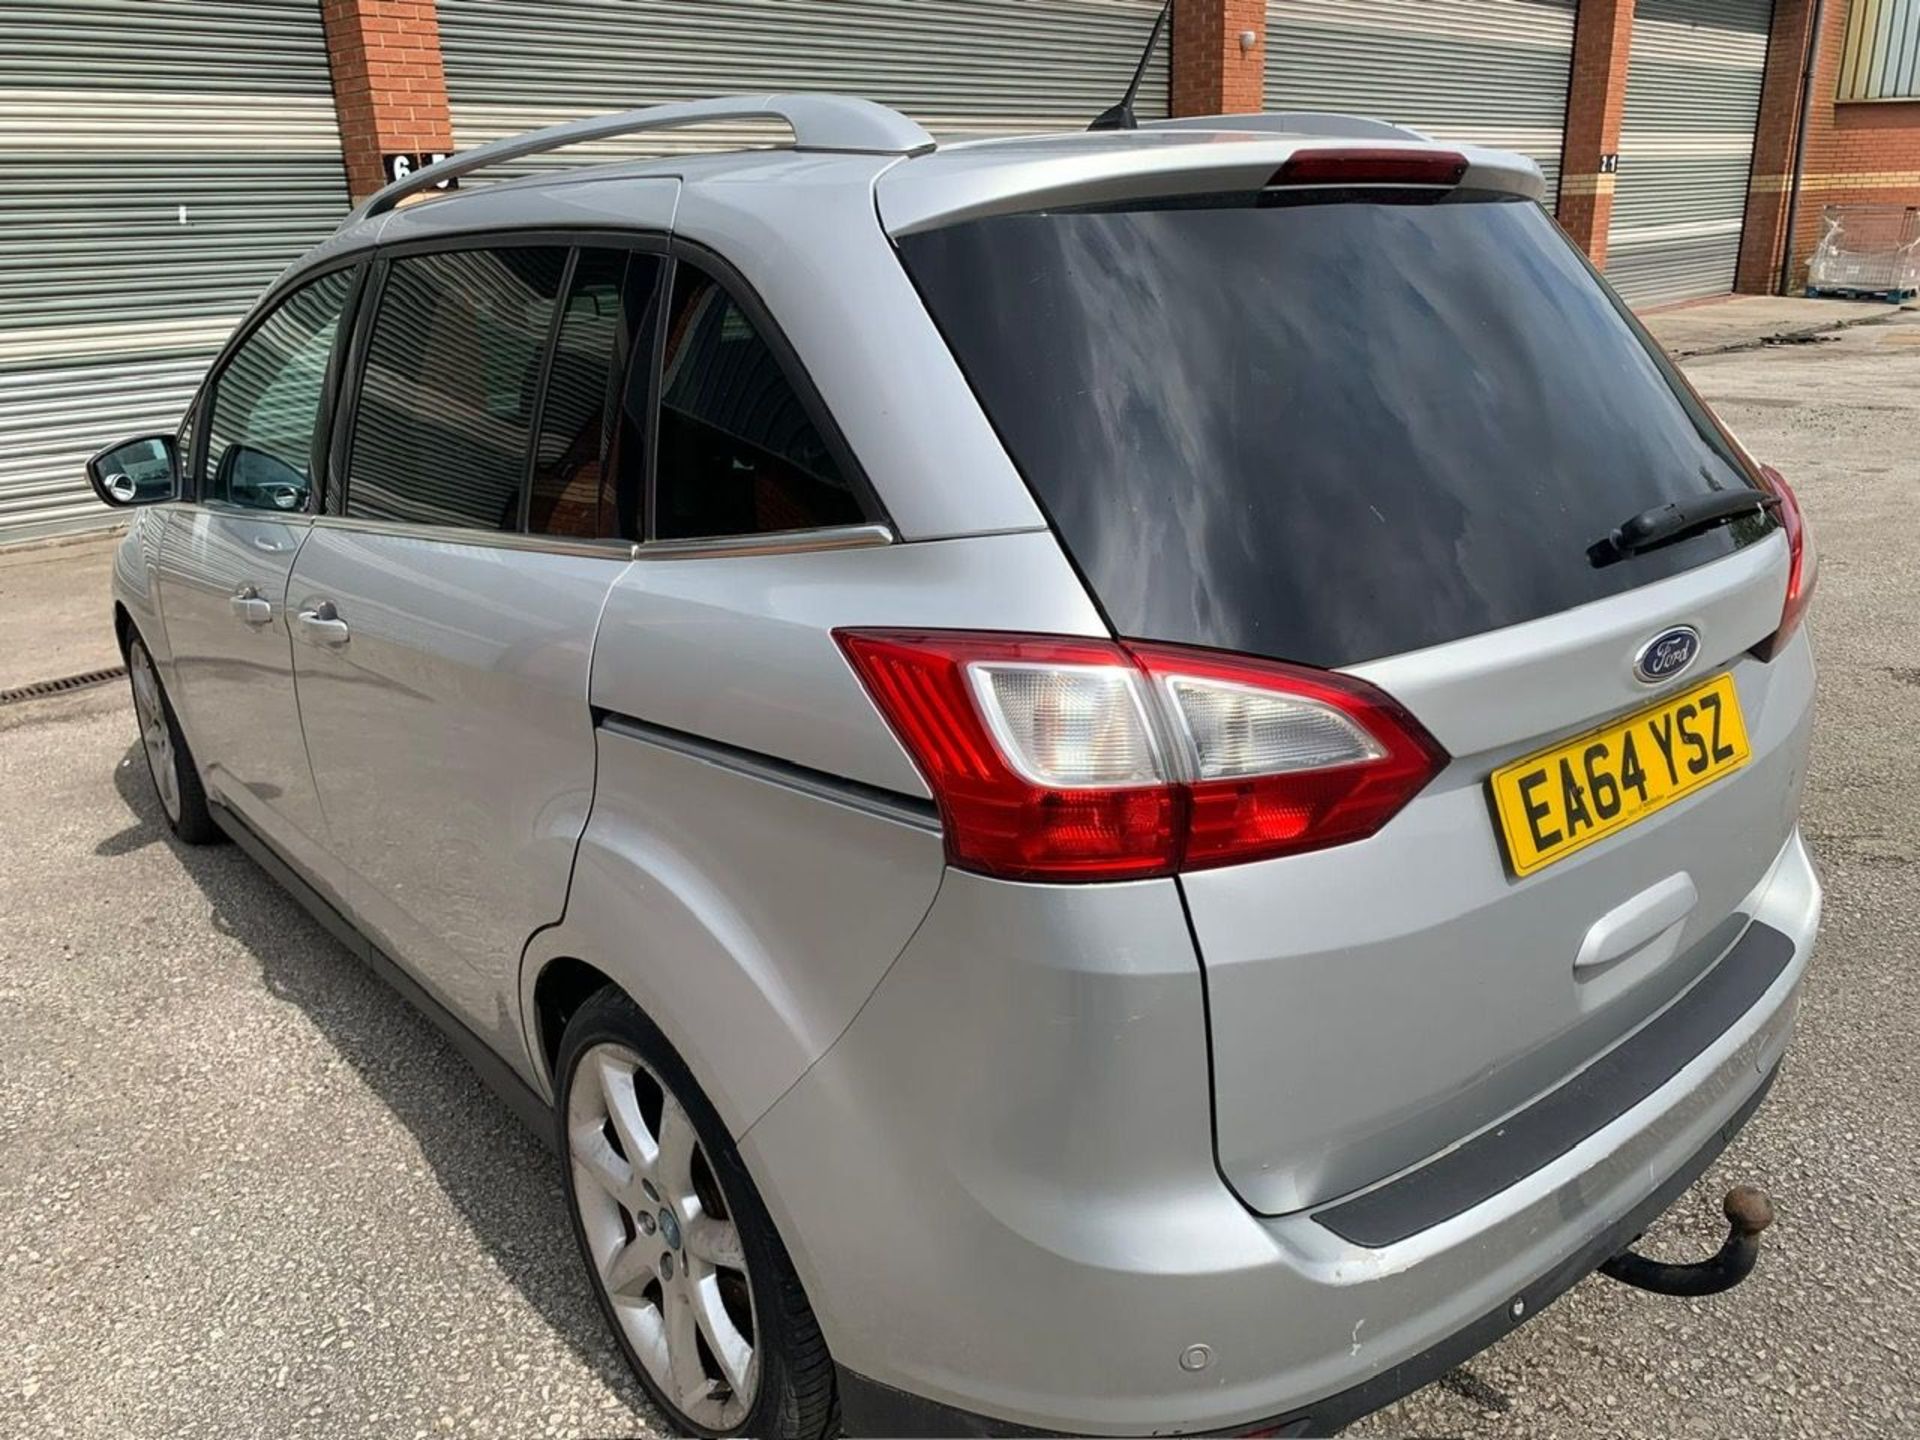 EA64 YSZ FORD GRAND C-MAX Silver Diesel First Registration: 12.11.14 Mot: 09.08.24 Mileage: 150, - Image 8 of 12